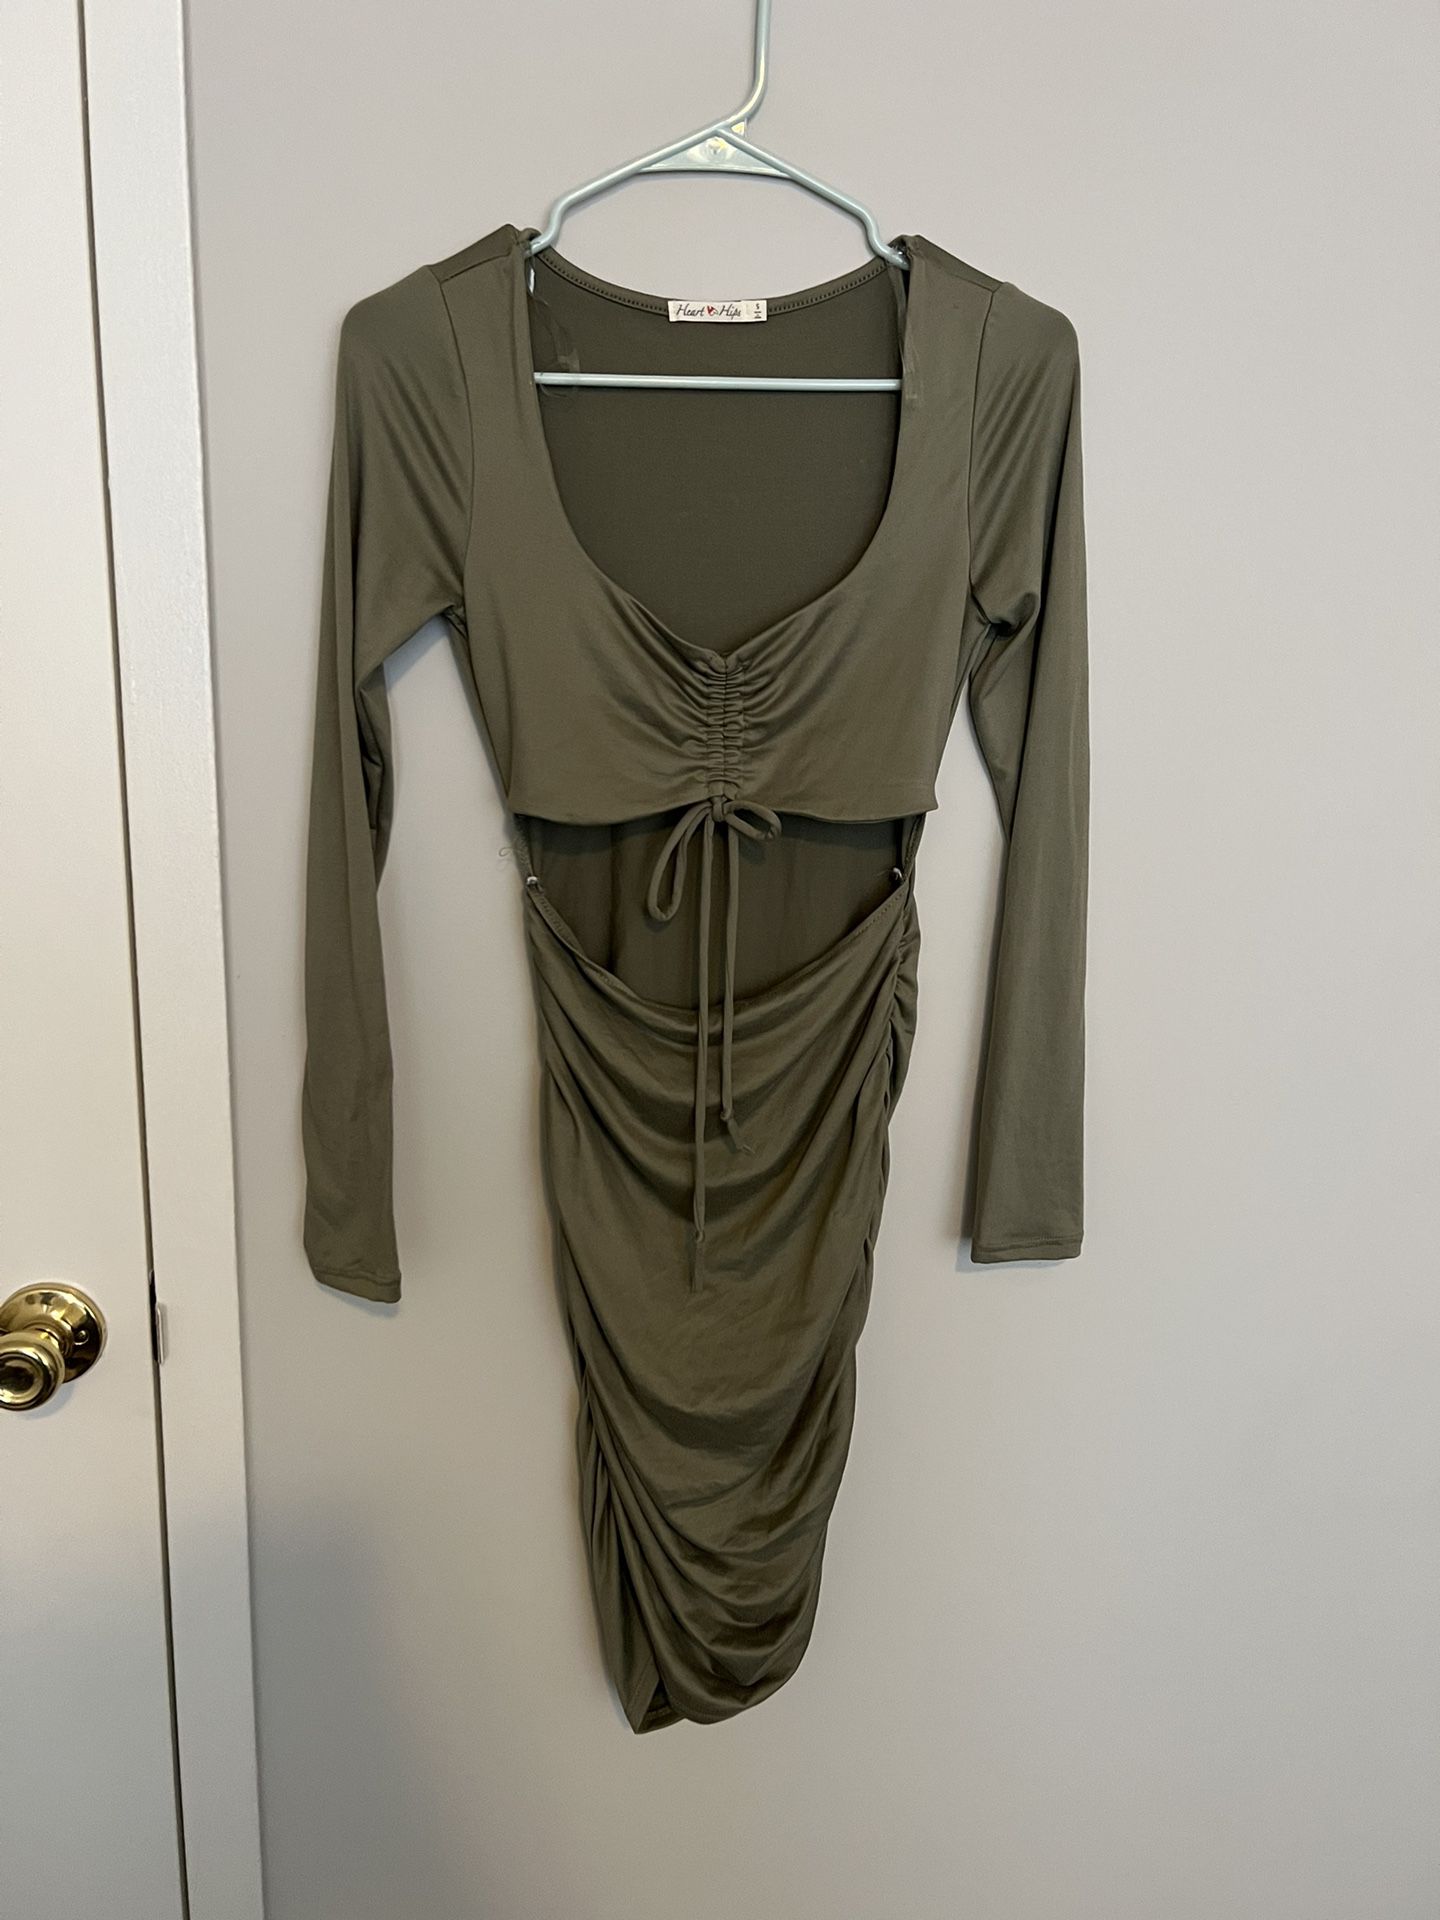 Army Green Dress Size Small, Never Worn 